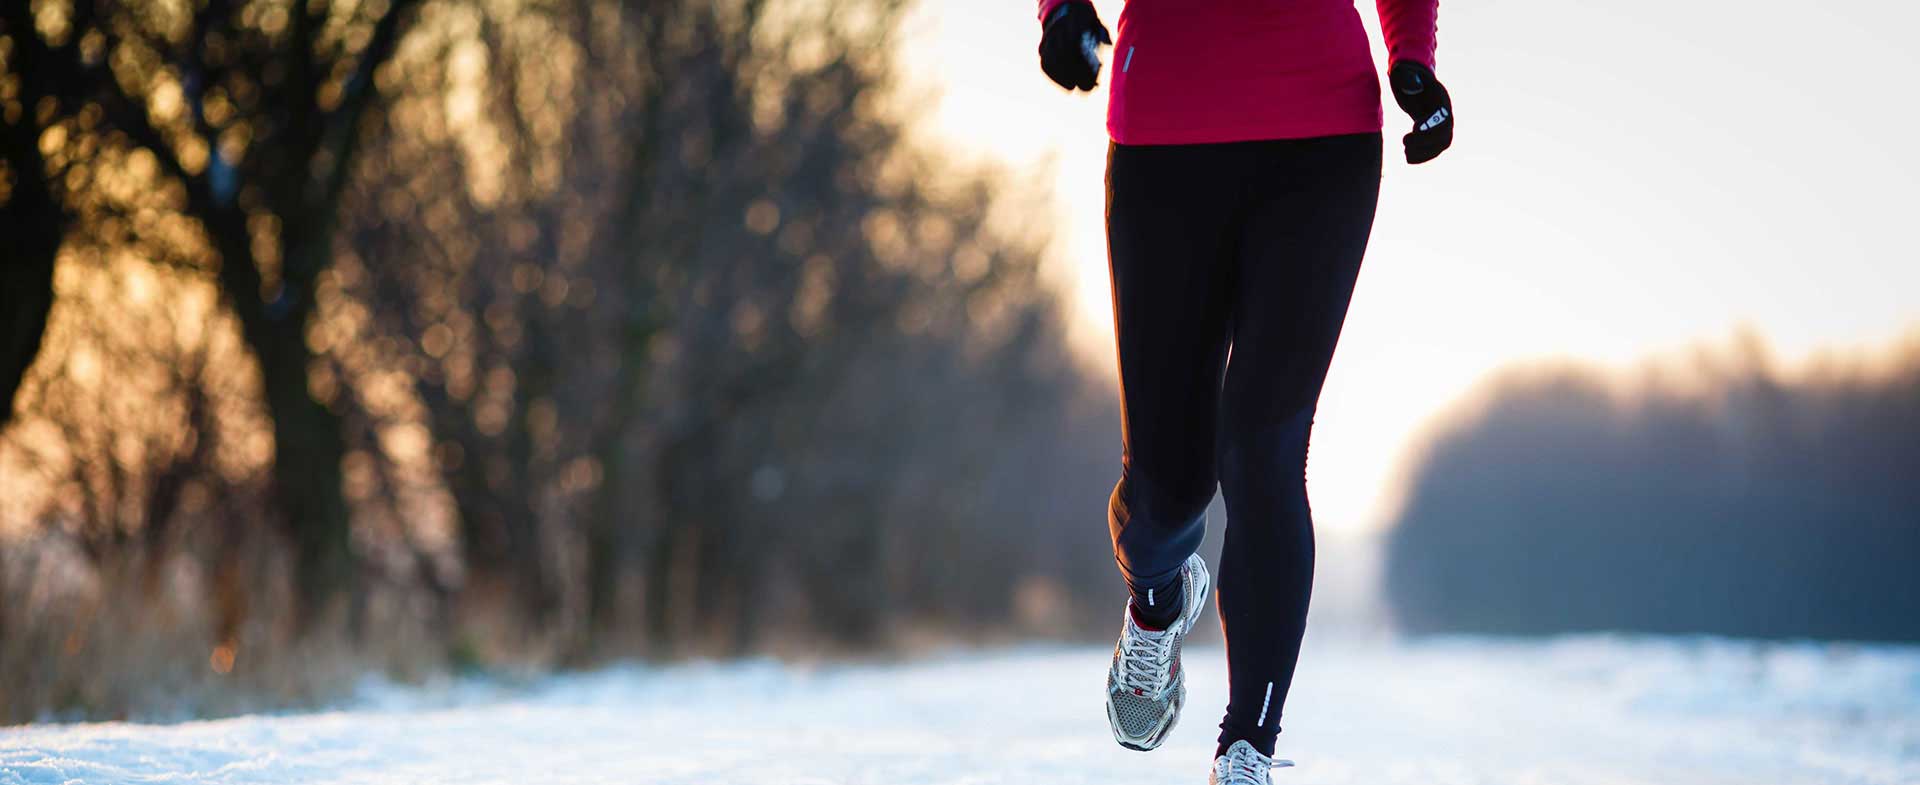 5 Must-Do's For Outdoor Winter Workouts